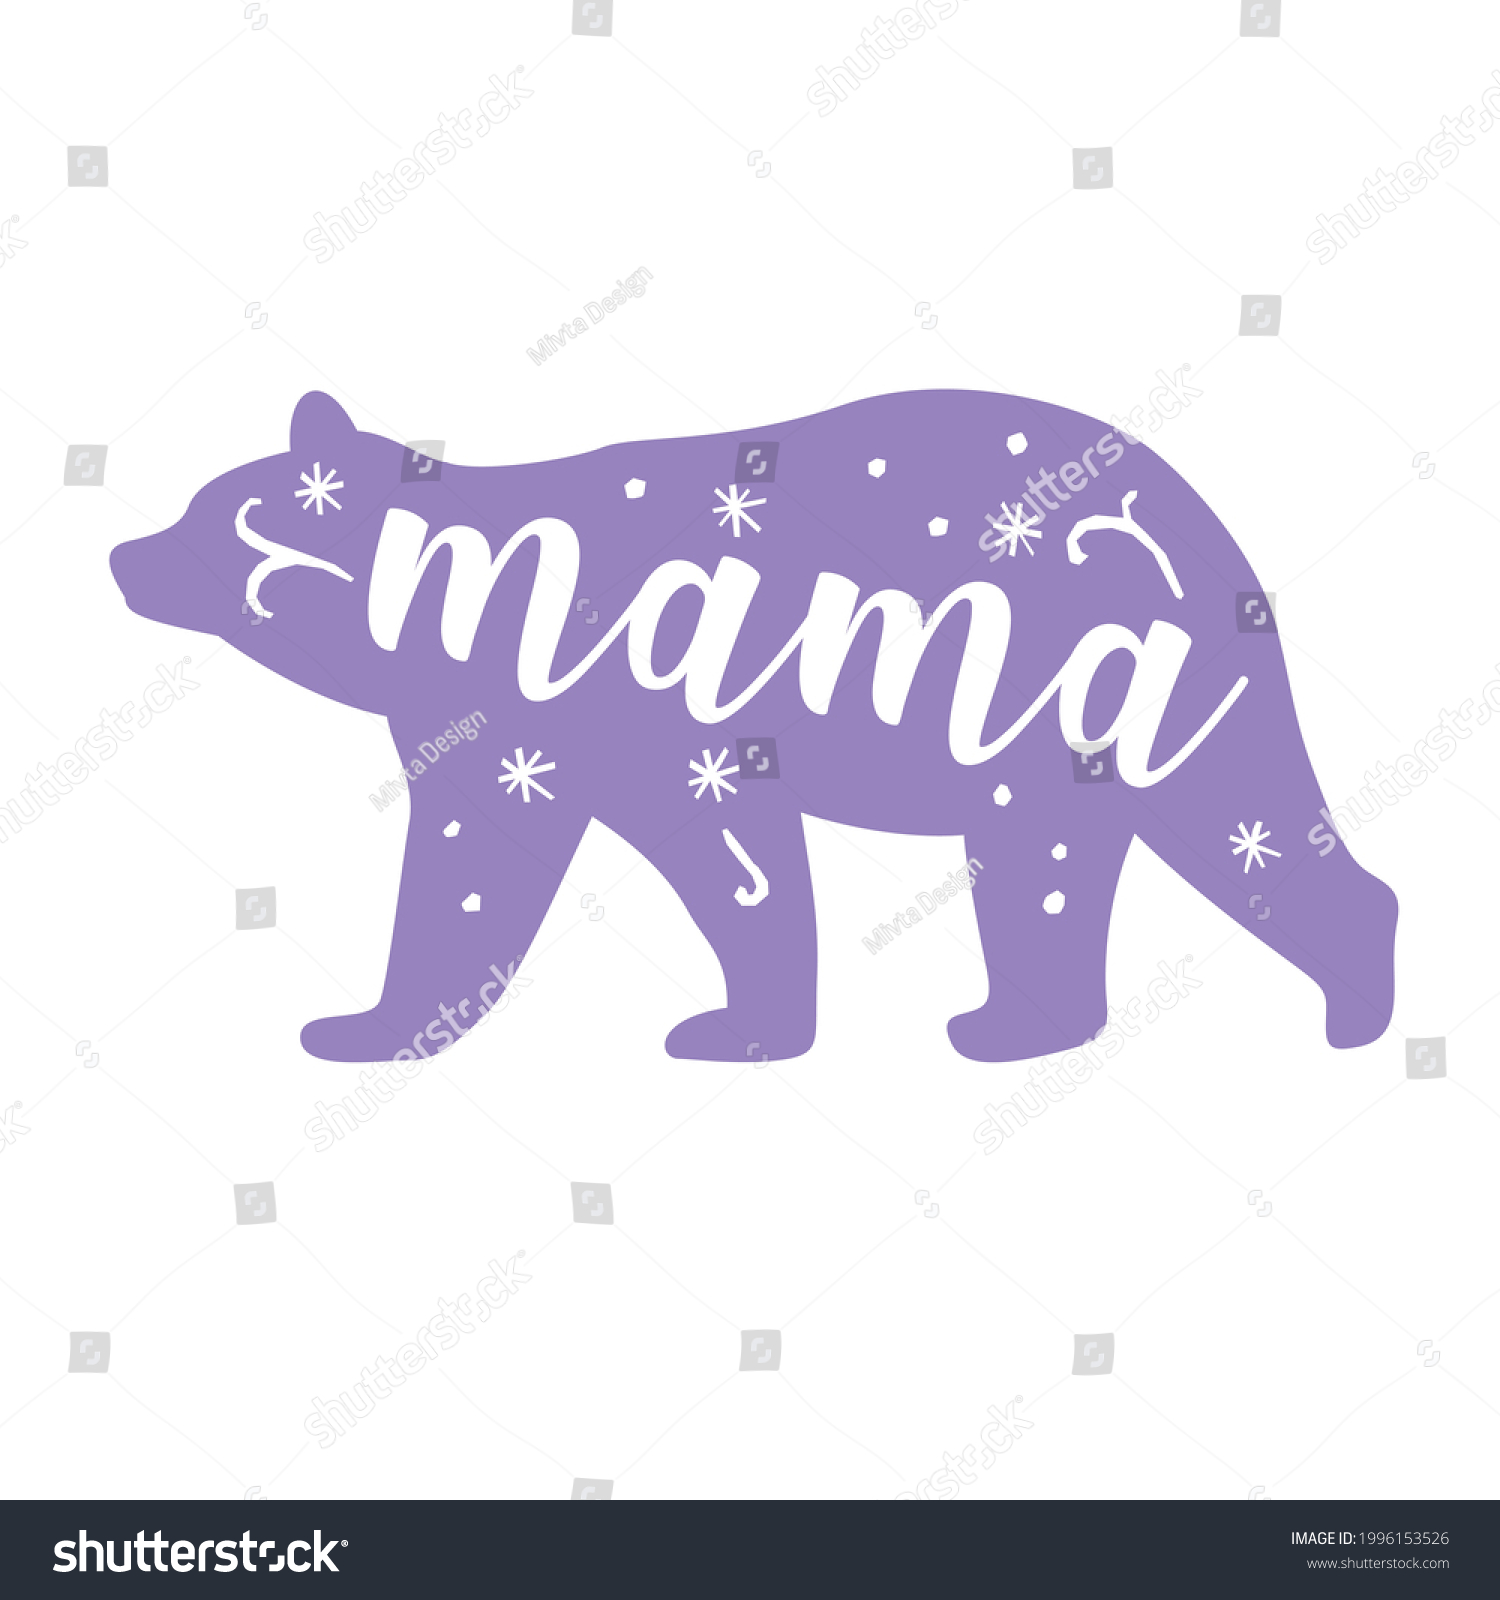 SVG of Mama bear. Hand drawn typography phrases with bear silhouettes. Bear family vector illustration isolated on white background. svg